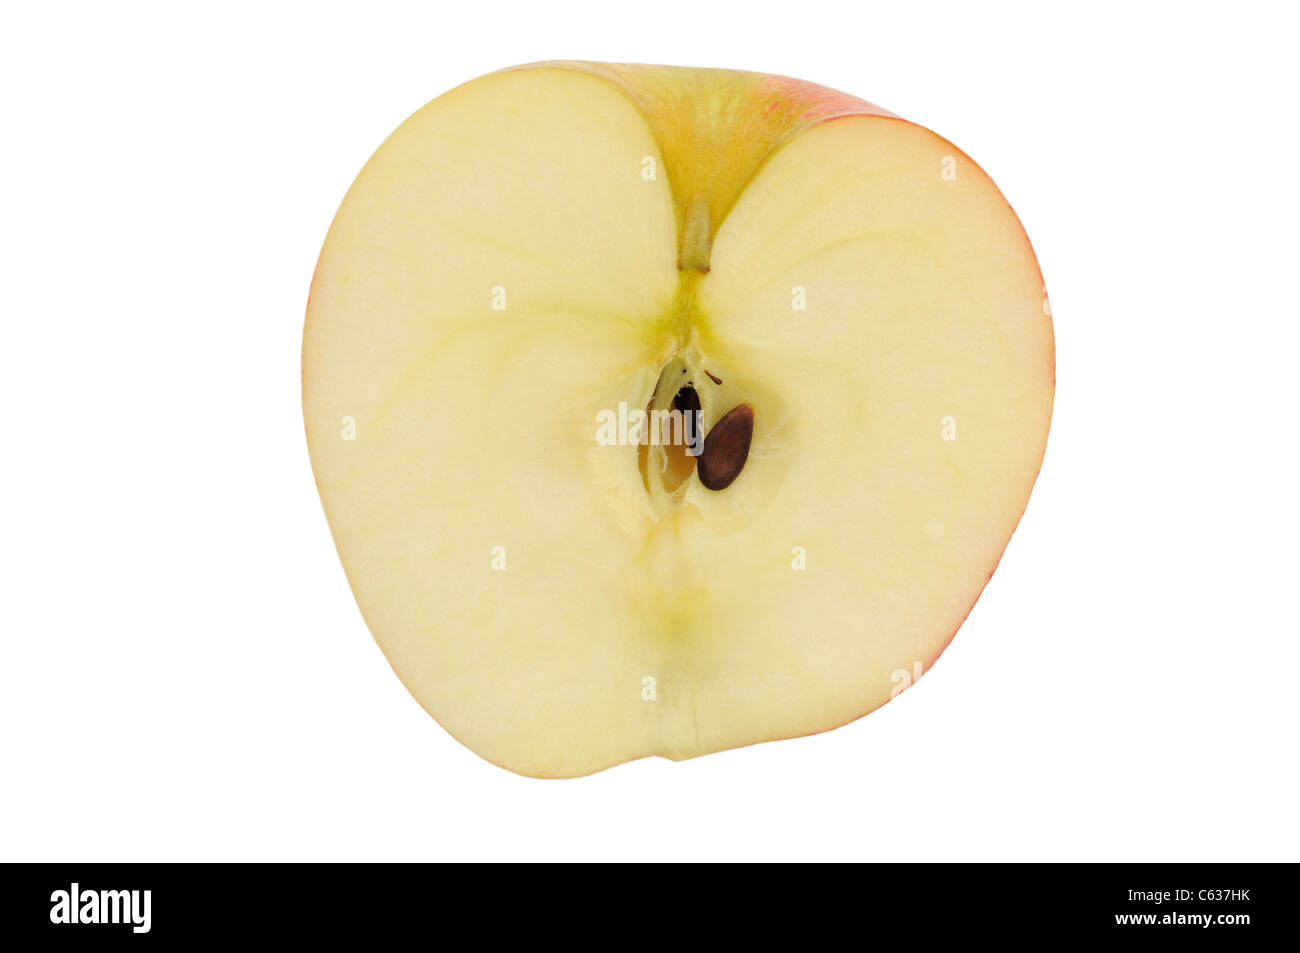 Half Apple with Pips on White Background Stock Photo